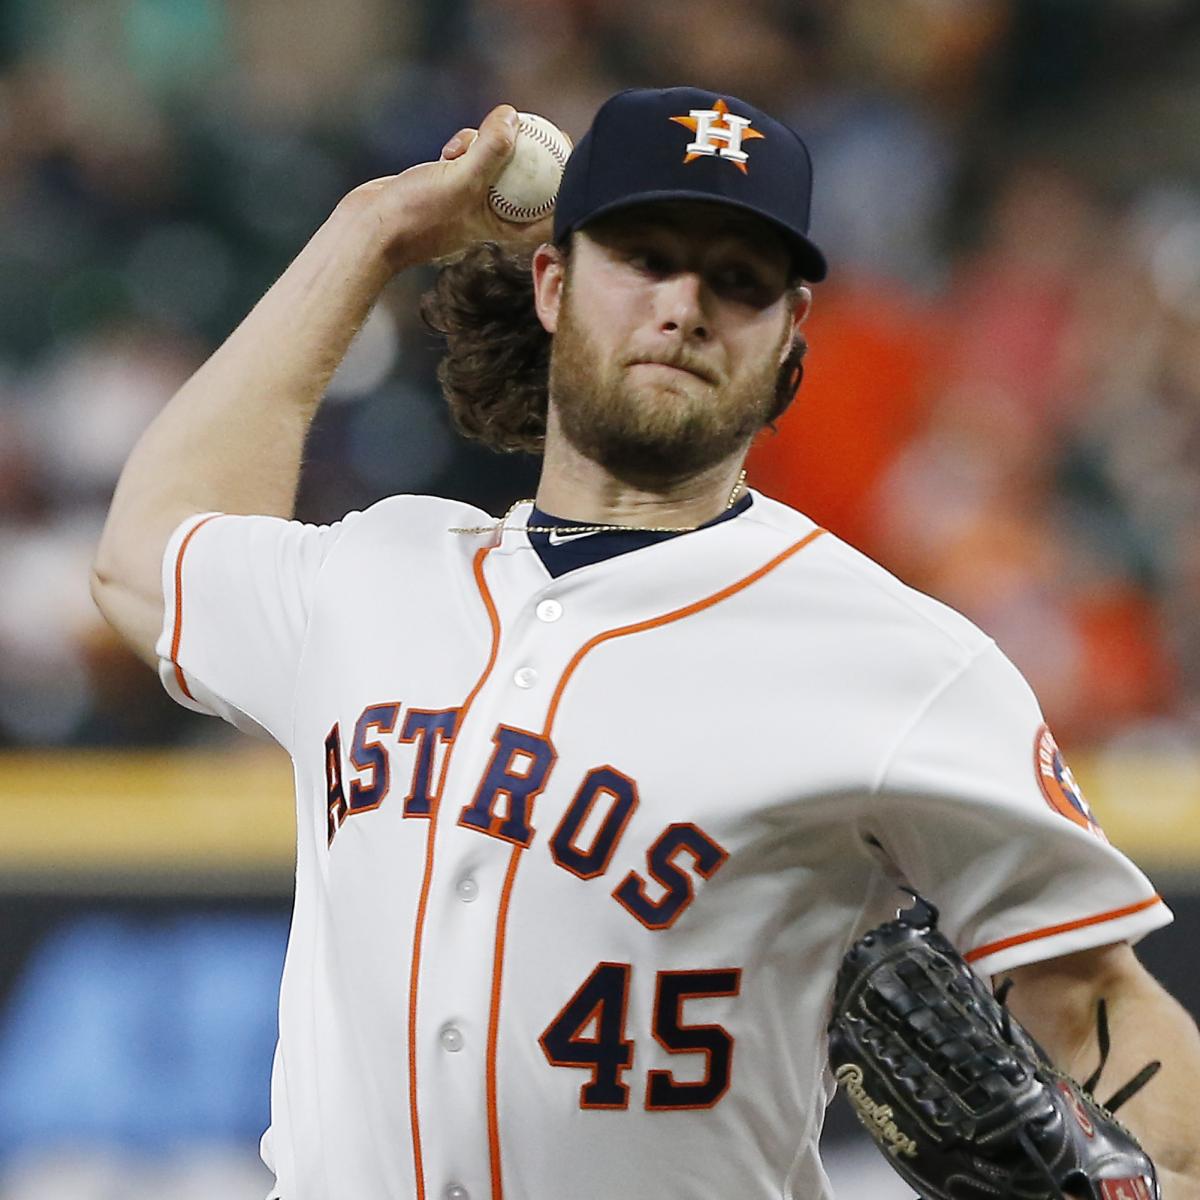 The biggest loser in the Gerrit Cole trade? The Yankees